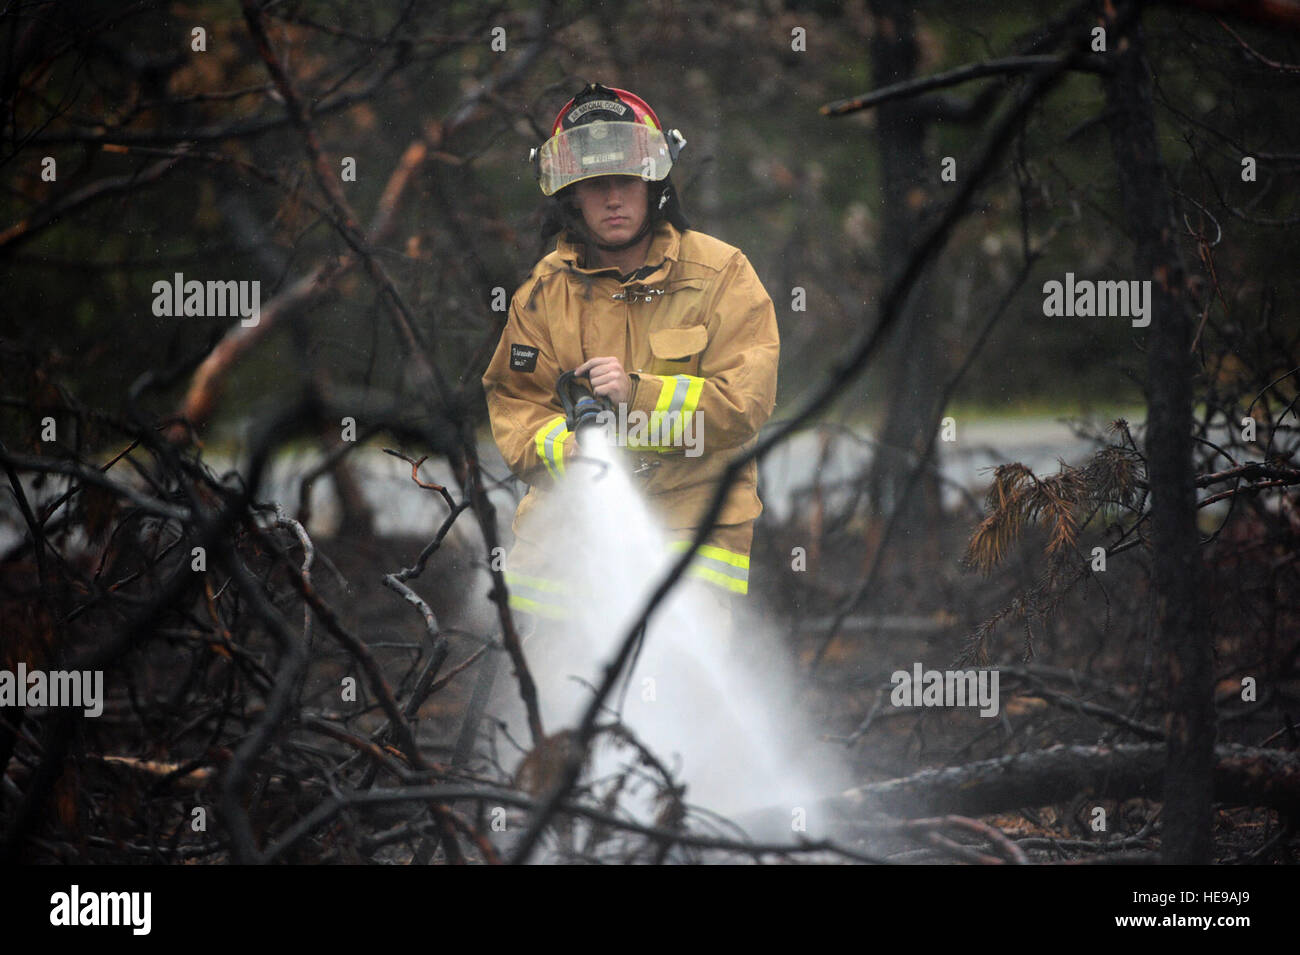 Senior Airman Brandon L. Ehlers, a firefighter with the 106th Rescue Wing, sprays down a burned area of woods Aug. 21, 2015, in Westhampton Beach, N.Y. Multiple agencies and fire departments responded to a major brush fire in the area. Firefighters from the 106th RQW checked for hot spots, which was a serious concern due to the dry weather during the previous week. (New York Air National Guard photo/Staff Sgt. Christopher S. Muncy) Stock Photo